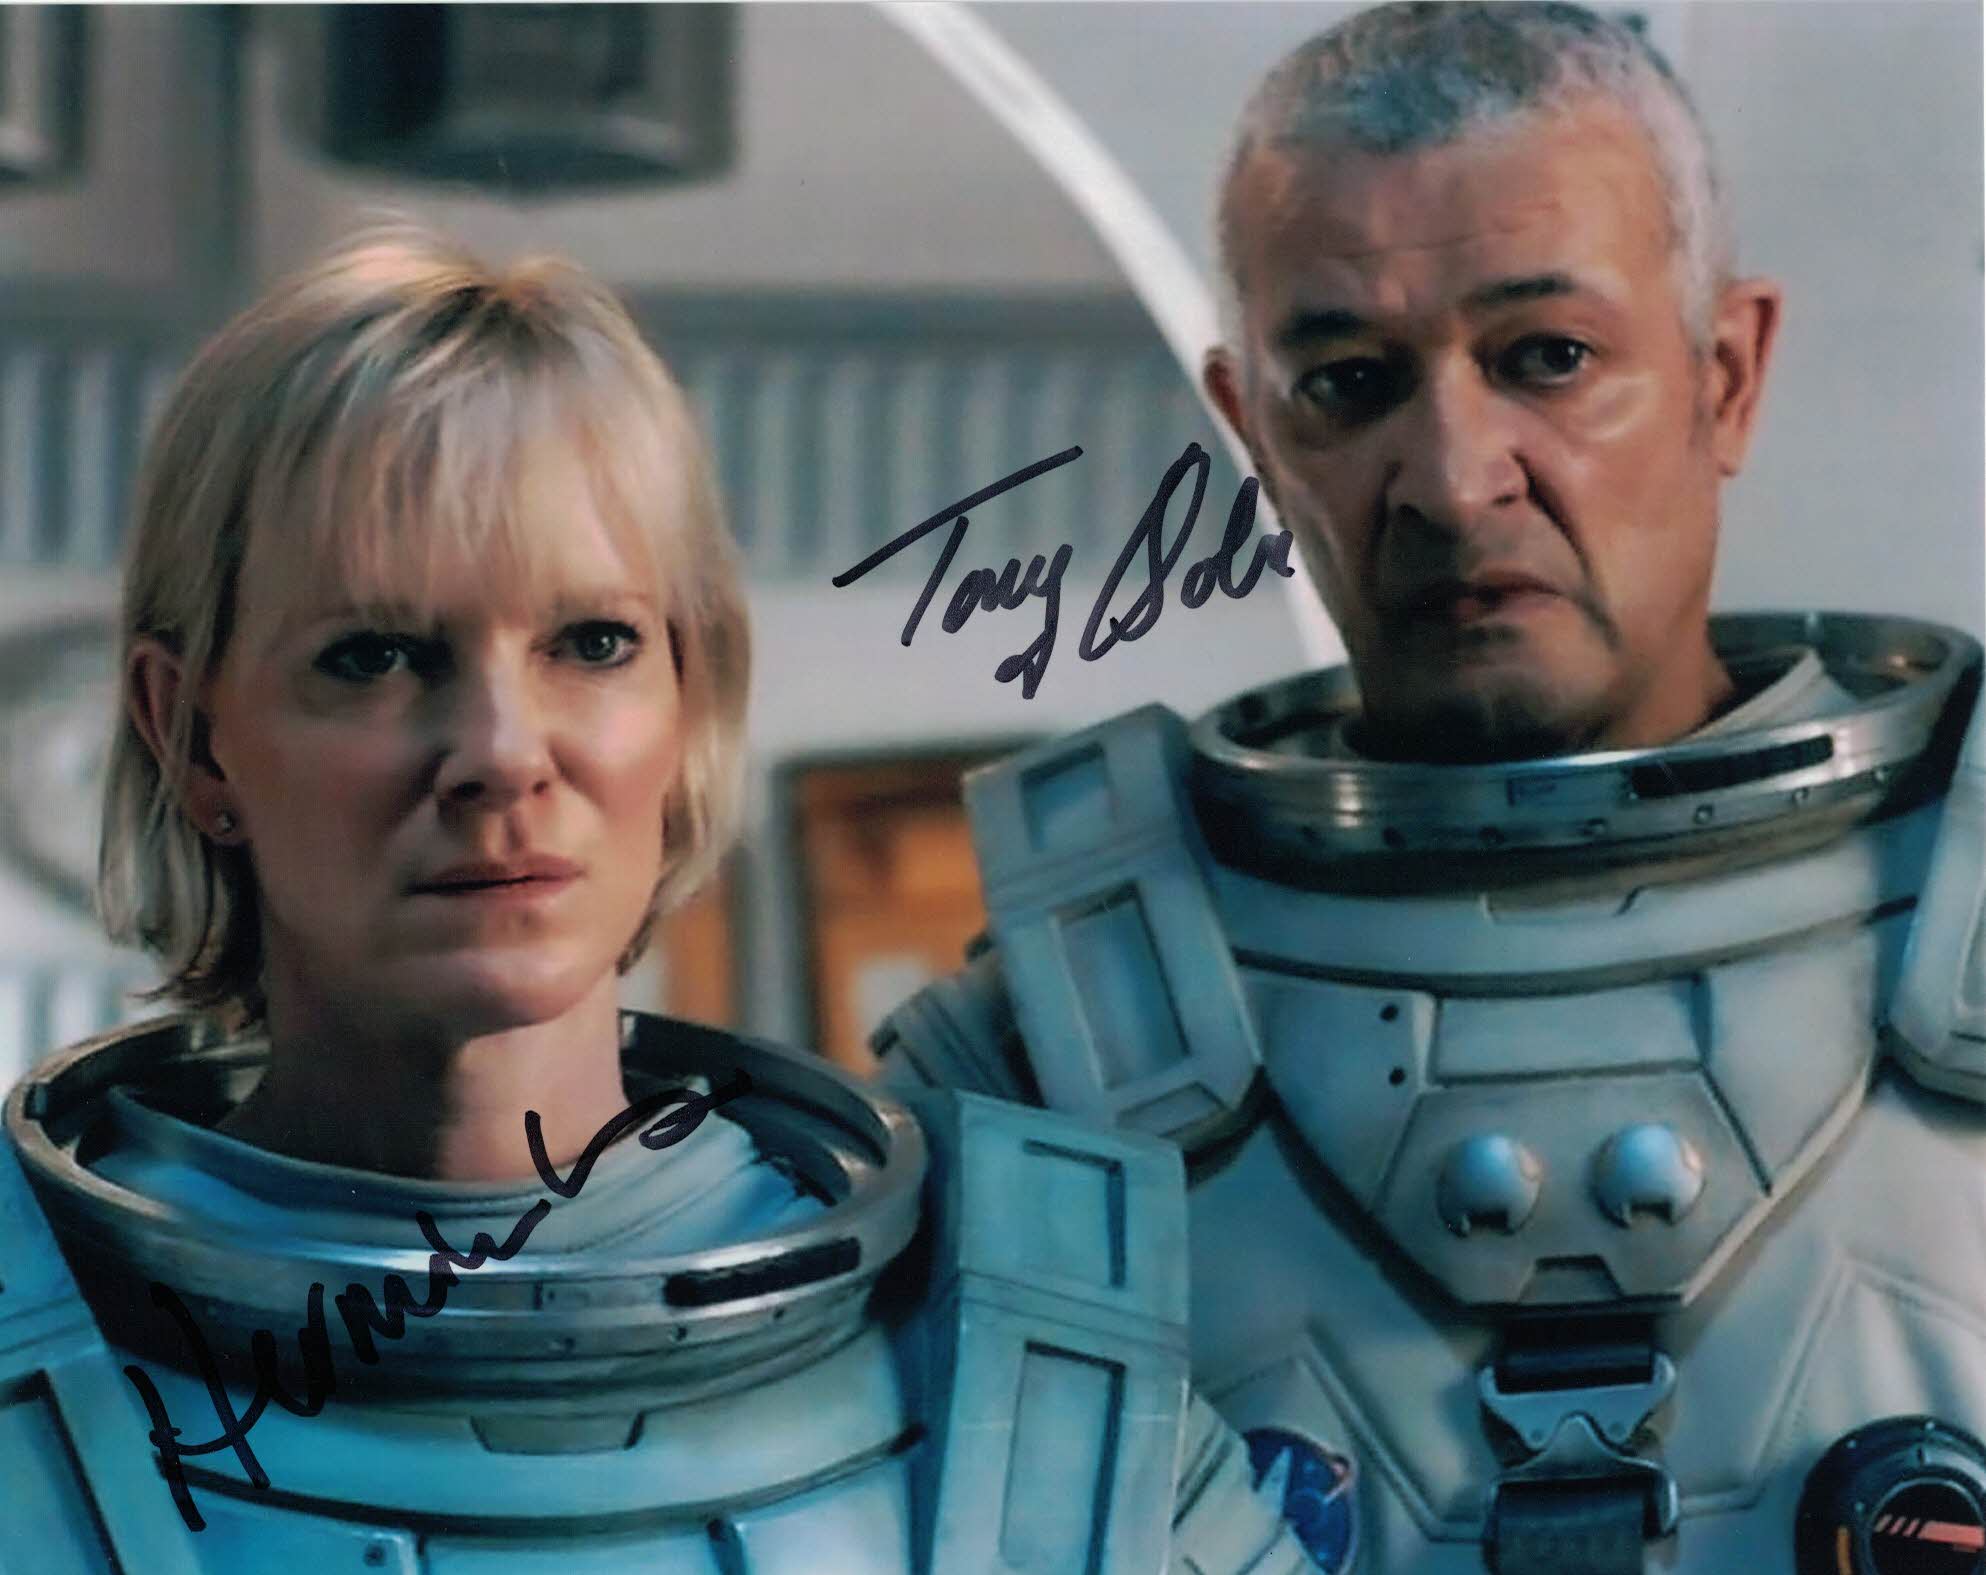 TONY OSOBA & HERMIONE NORRIS - Doctor Who Kill The Moon double hand signed 10 x 8 photo